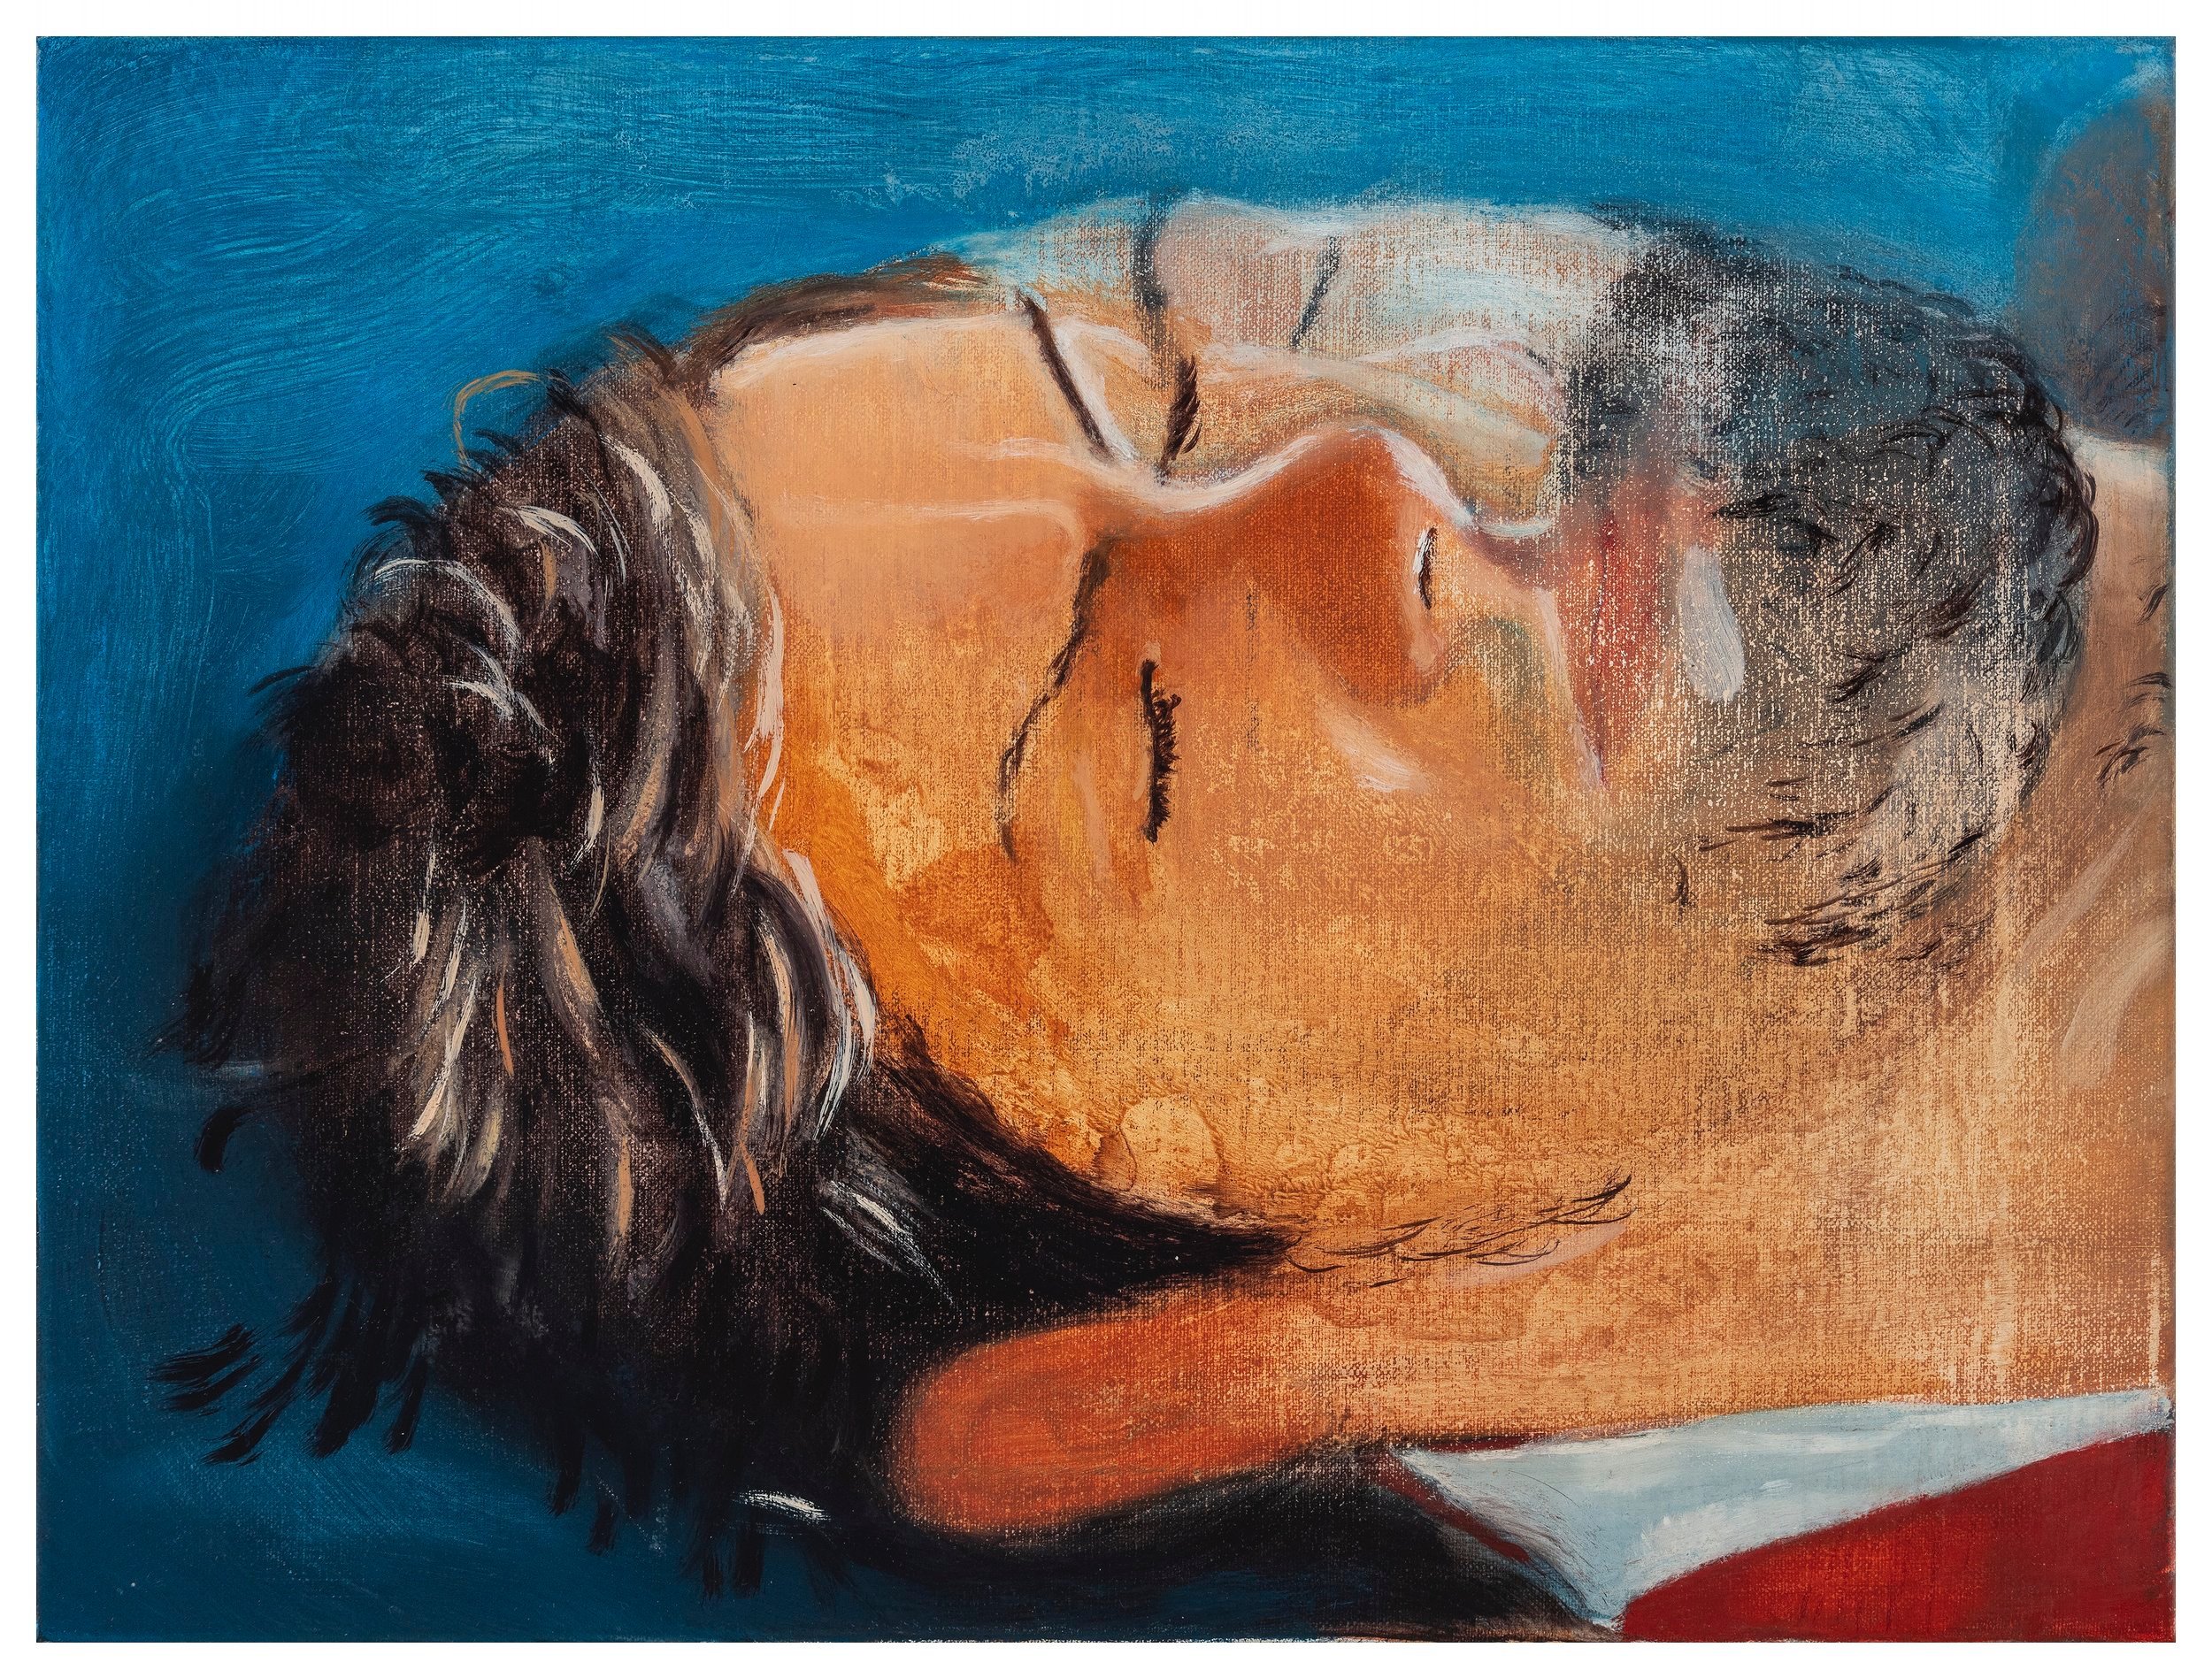 Me & River 1 (Transforming into River Phoenix from My Own Private Idaho), 2023 Oil on linen 12 x 16 inches